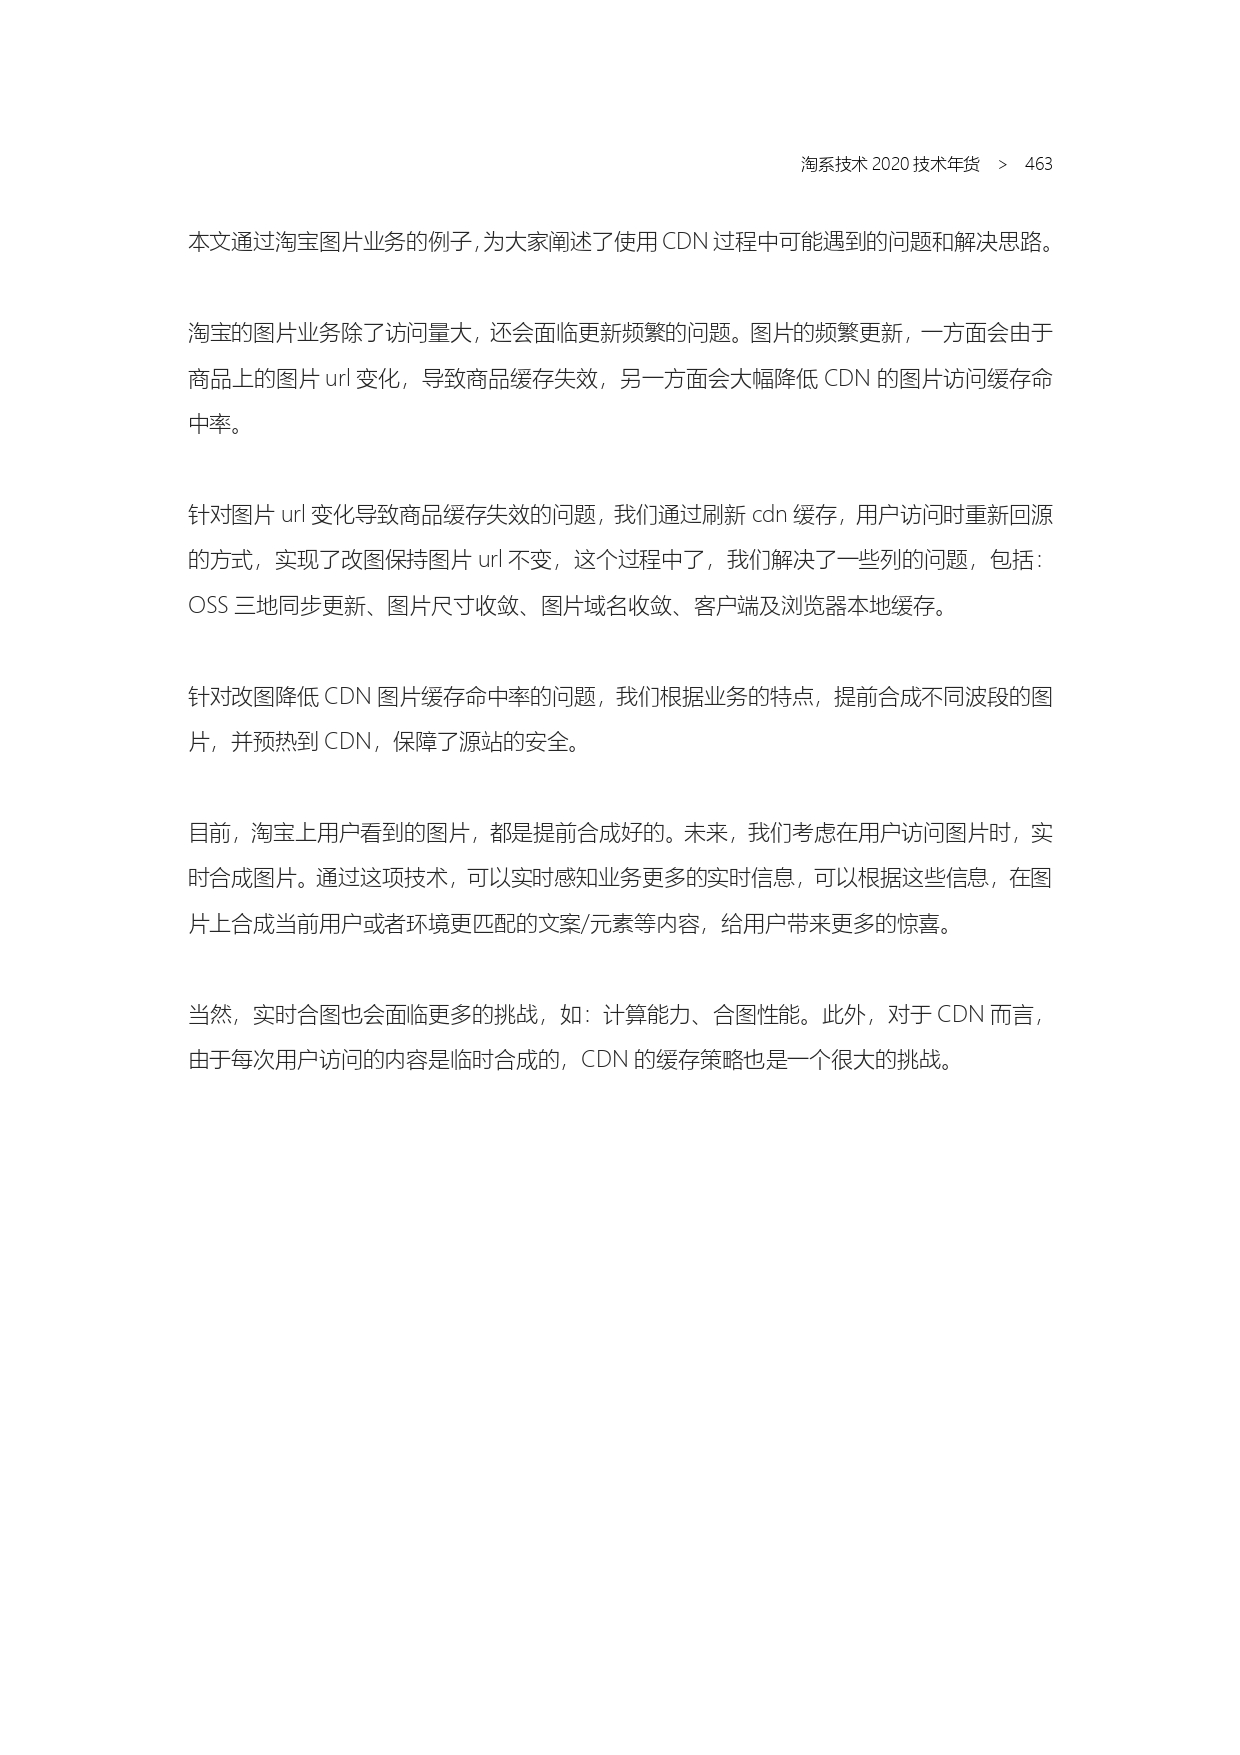 The Complete Works of Tao Technology 2020-1-570_page-0463.jpg